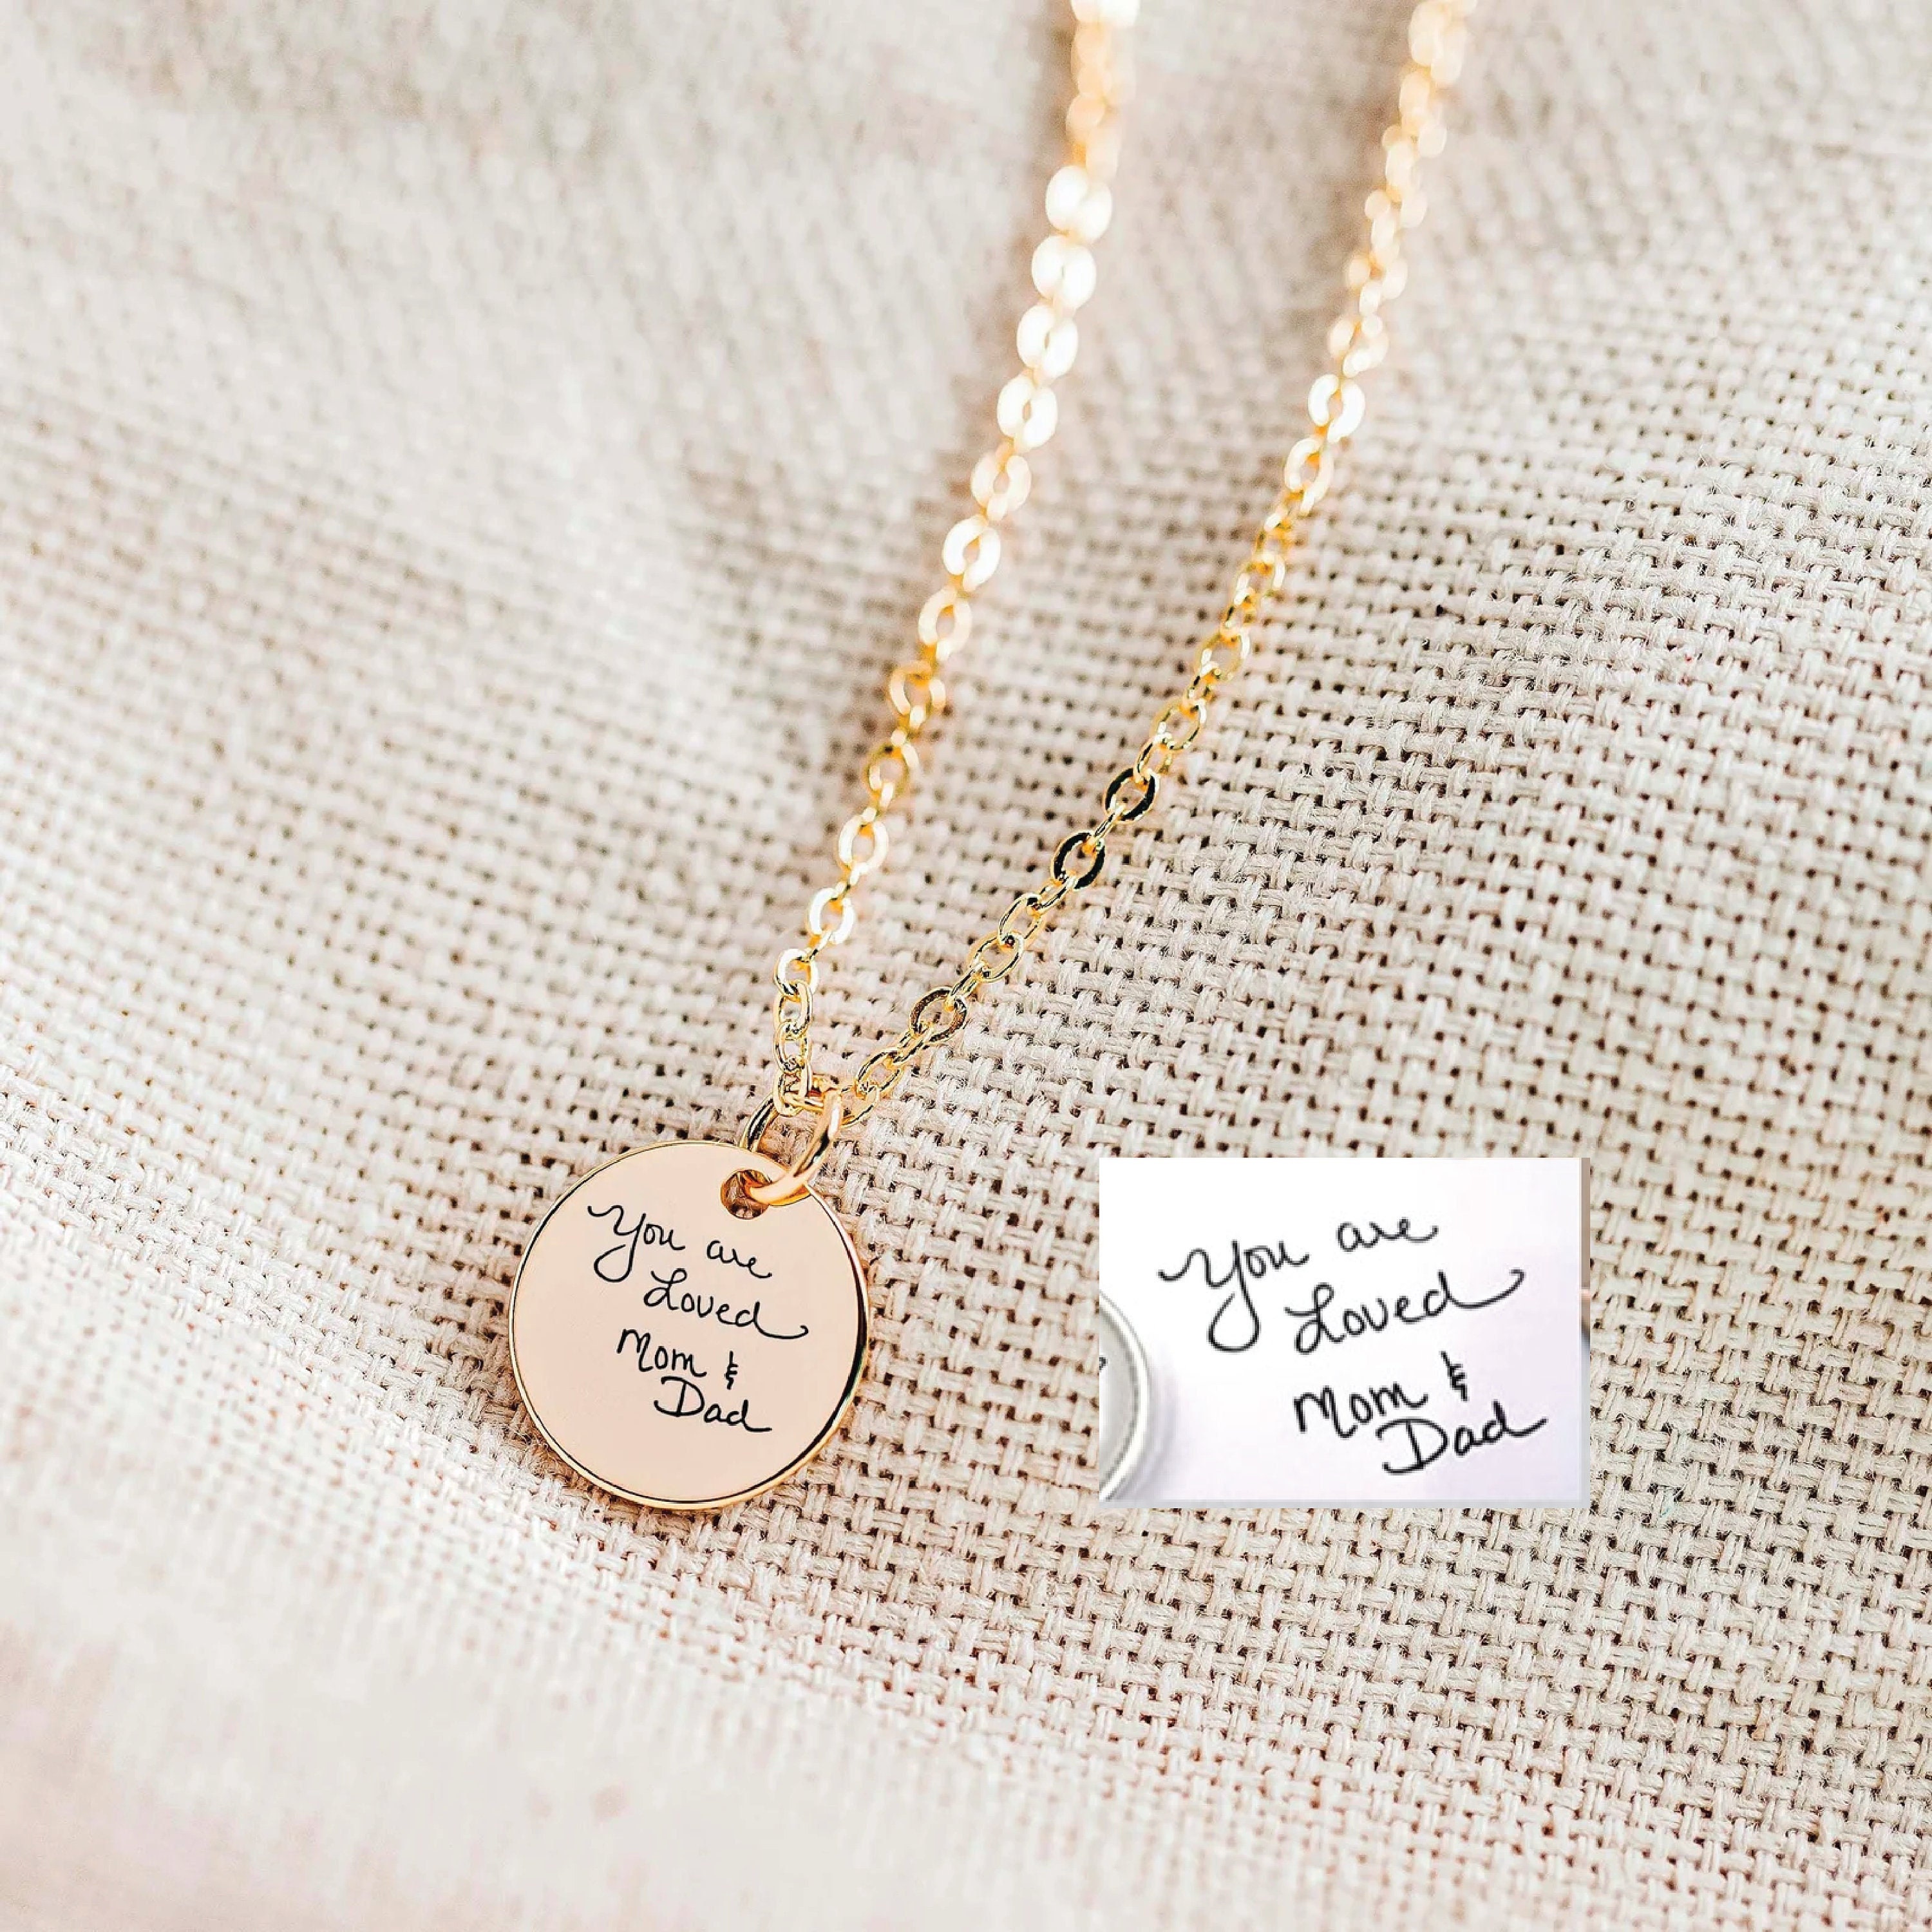  Quote Engraved Necklace, Custom Engraved Disc - Inspirational  words or phrase Pendant - Personalized Sterling Silver Pendant - Engraved  Jewelry : Handmade Products